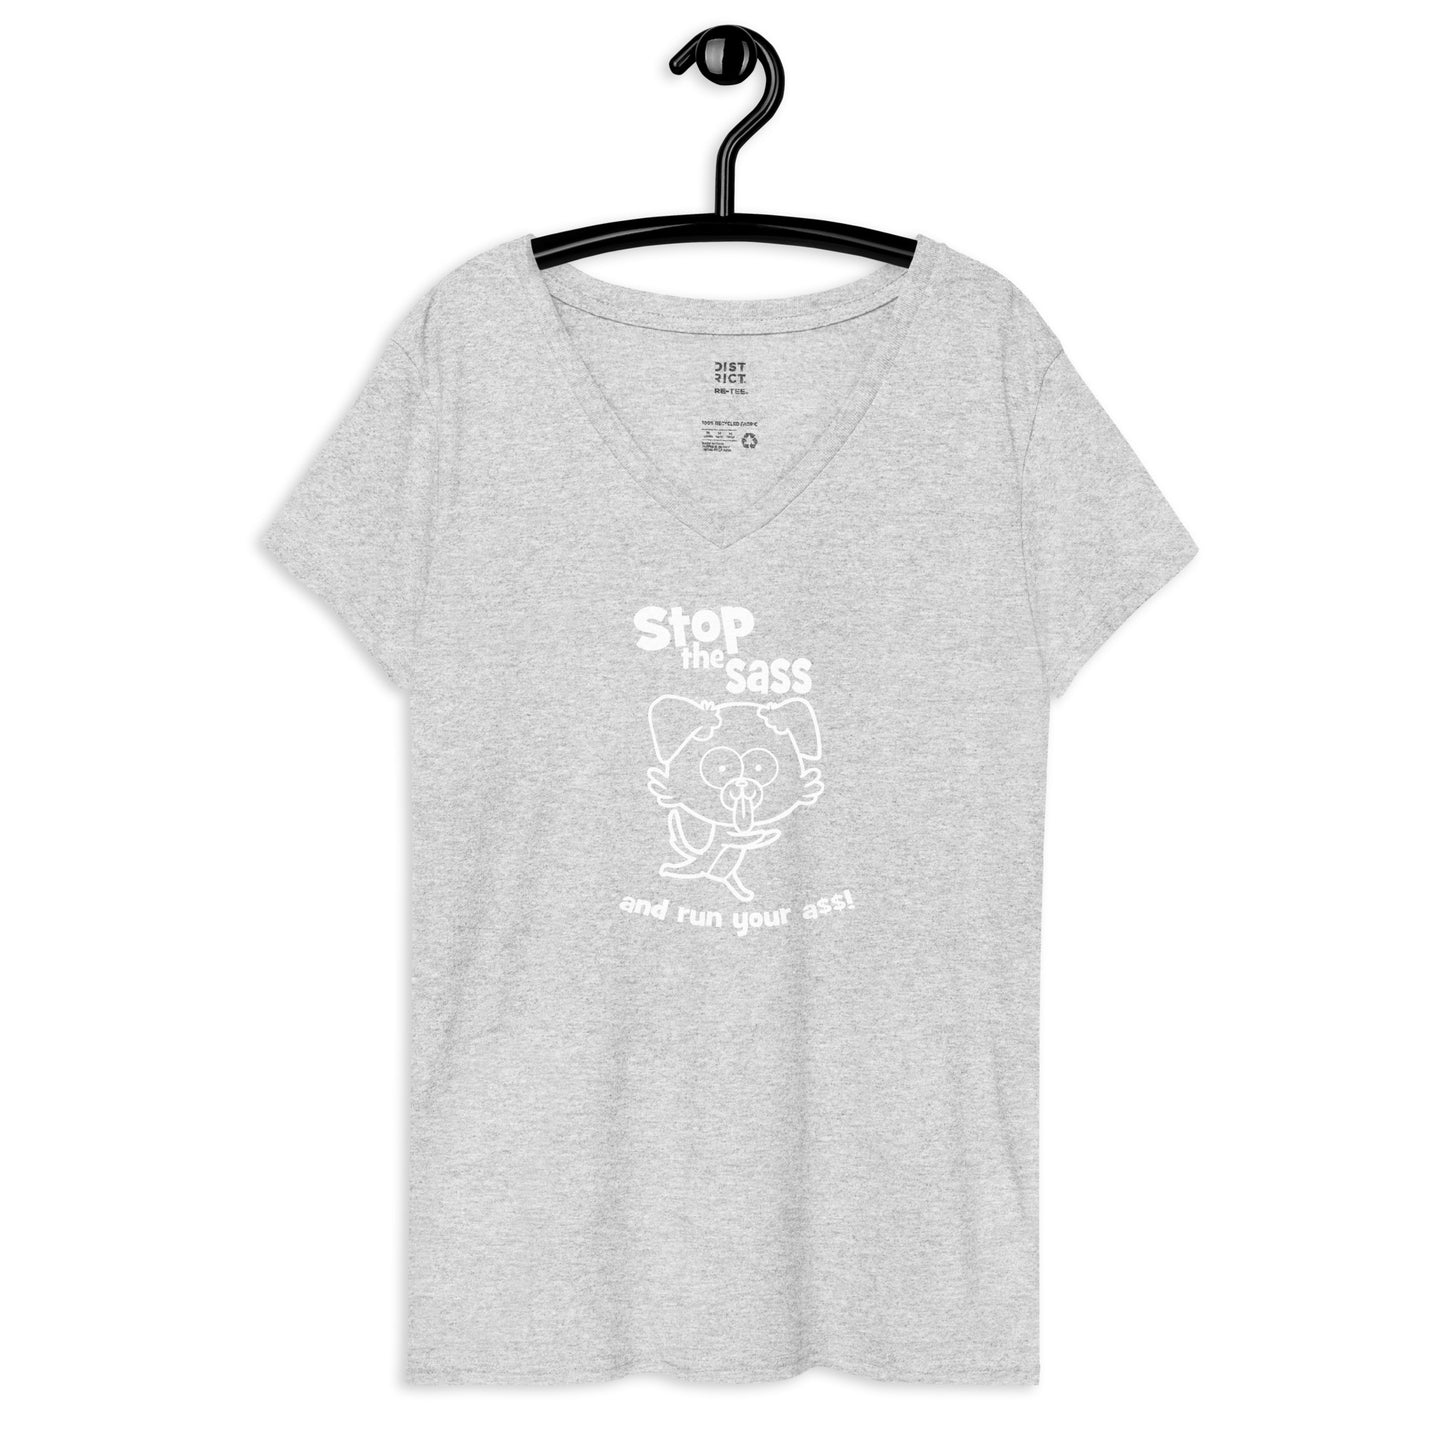 STOP THE SASS 2 Women’s recycled v-neck t-shirt